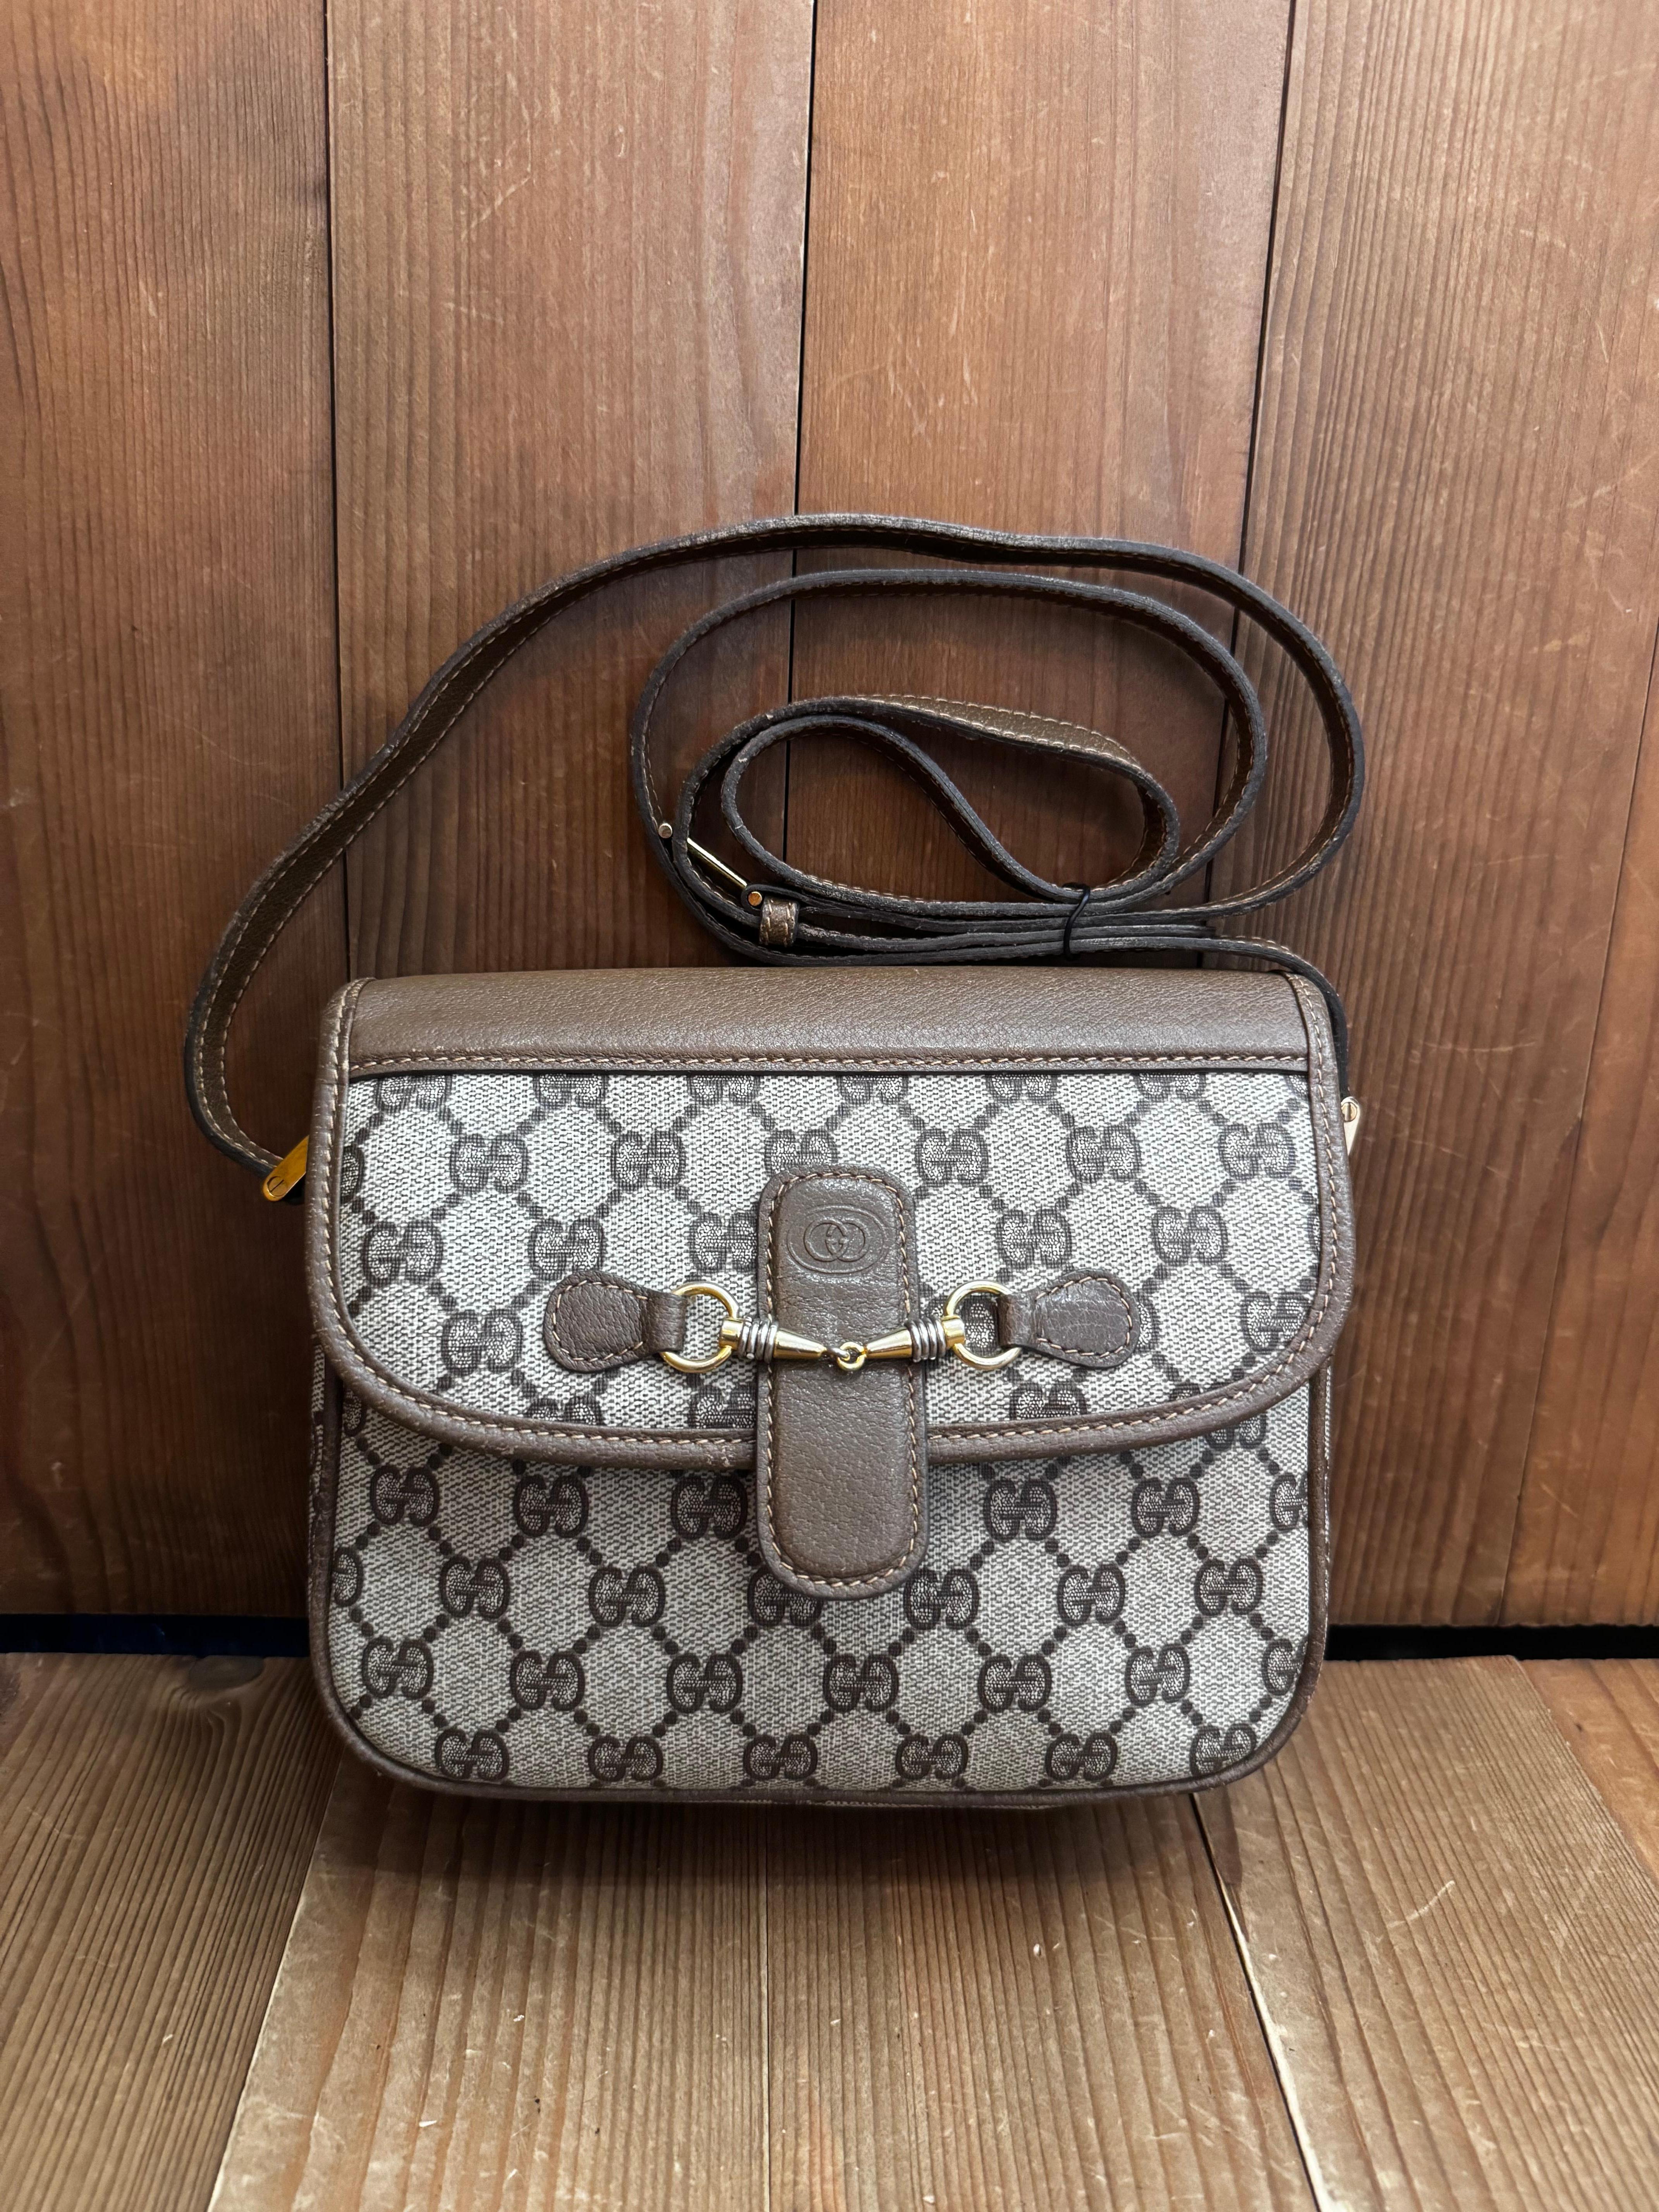 This vintage GUCCI crossbody bag is crafted of GG monogram coated canvas and pigskin leather in brown featuring gold toned hardware. Front flap magnetic snap closure opens to a coated interior in beige featuring a zippered pocket. Made in Italy.